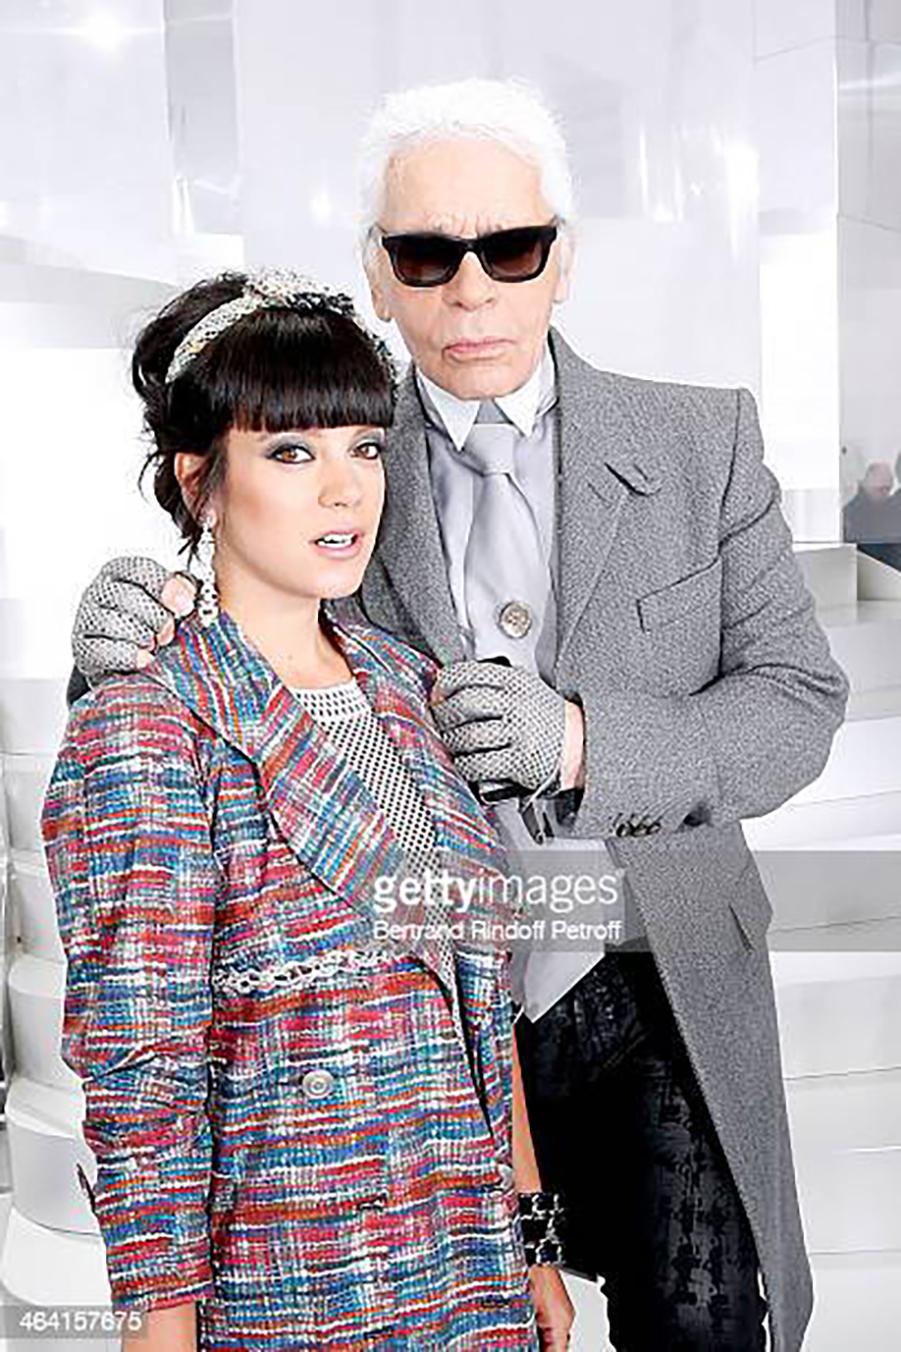 Famous Chanel trench coat as seen on Lilly Allen.
Size mark 34 fr, comes as oversized. Never worn.
- CC logo silver-tone buttons at front and cuffs
- signature braided trim
